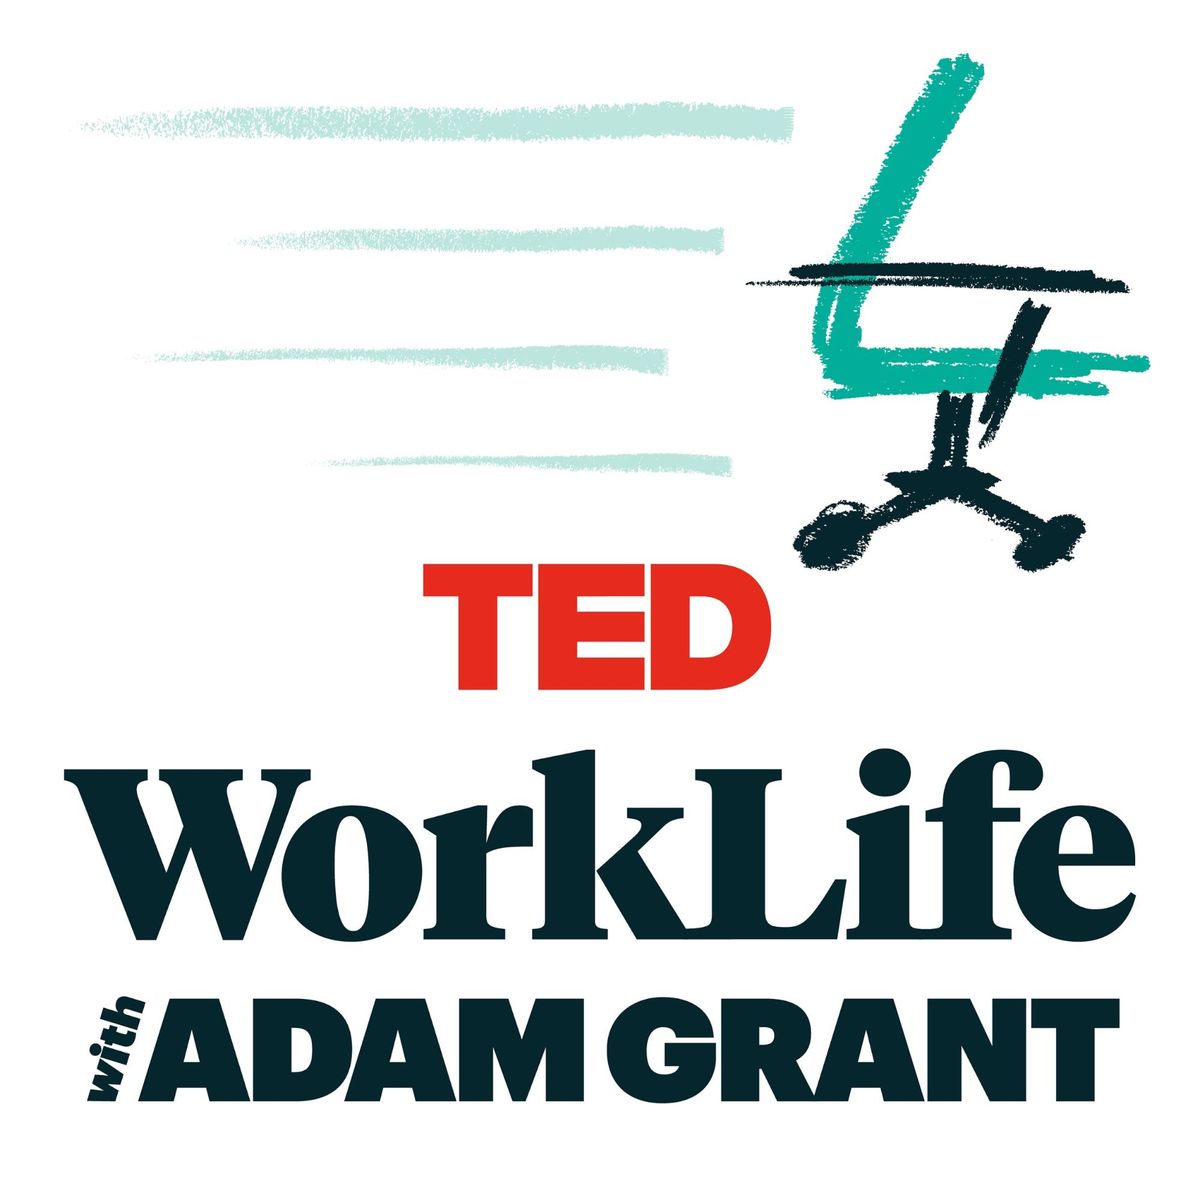 Ted WorkLife